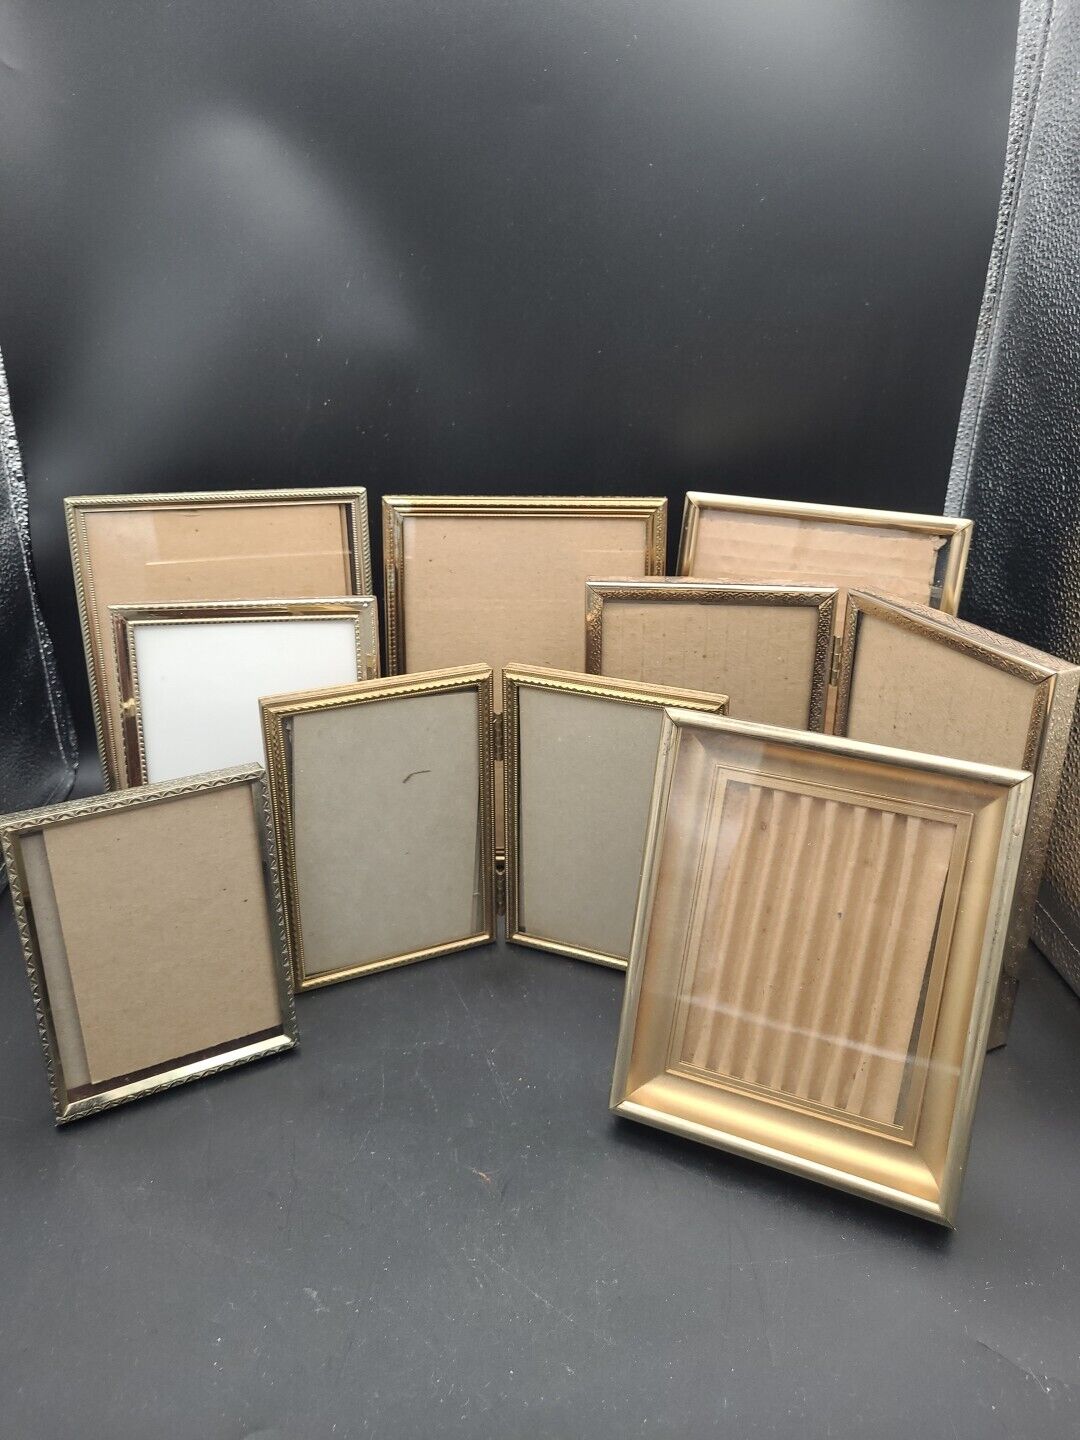 LOT OF 8 VINTAGE BRASS GOLD METAL PICTURE FRAMES (ASSORTED SIZES)